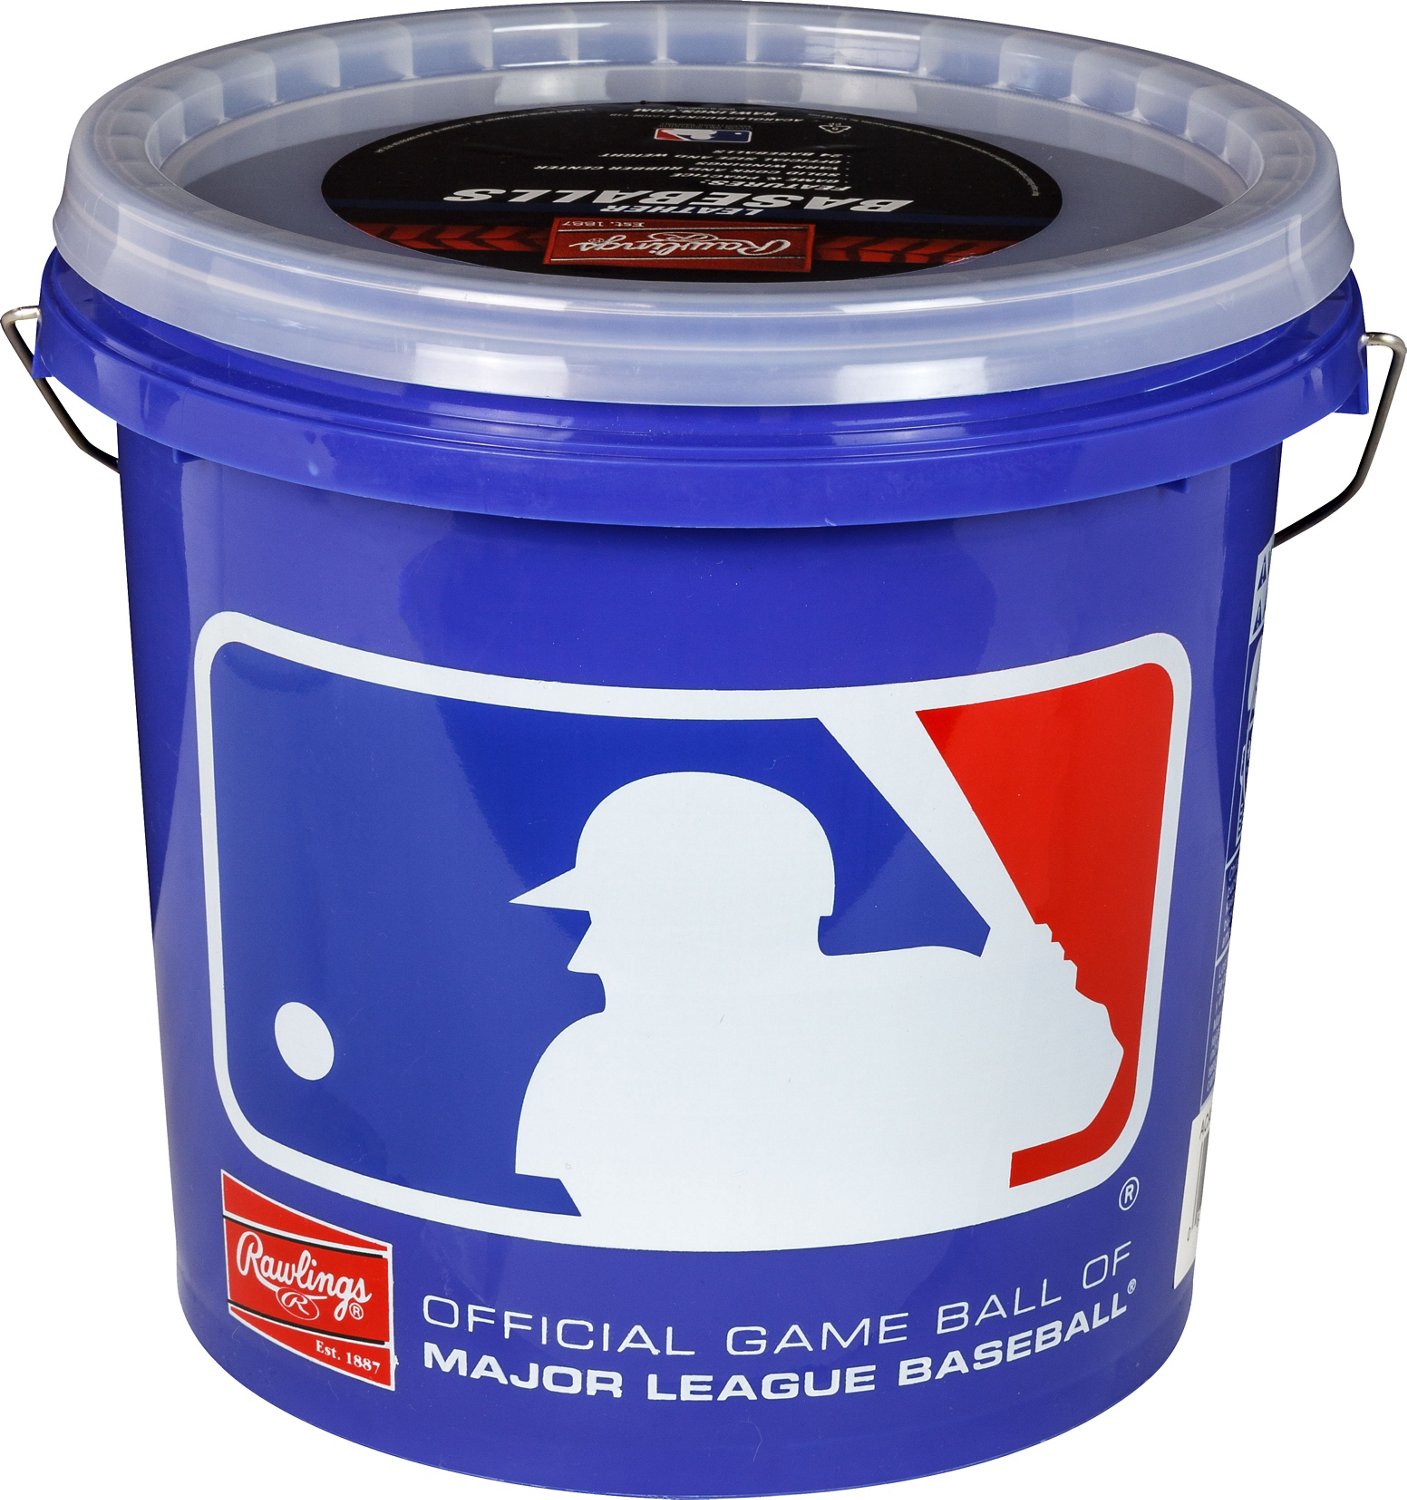 Rawlings Official League Practice Baseballs 24-Pack | Academy